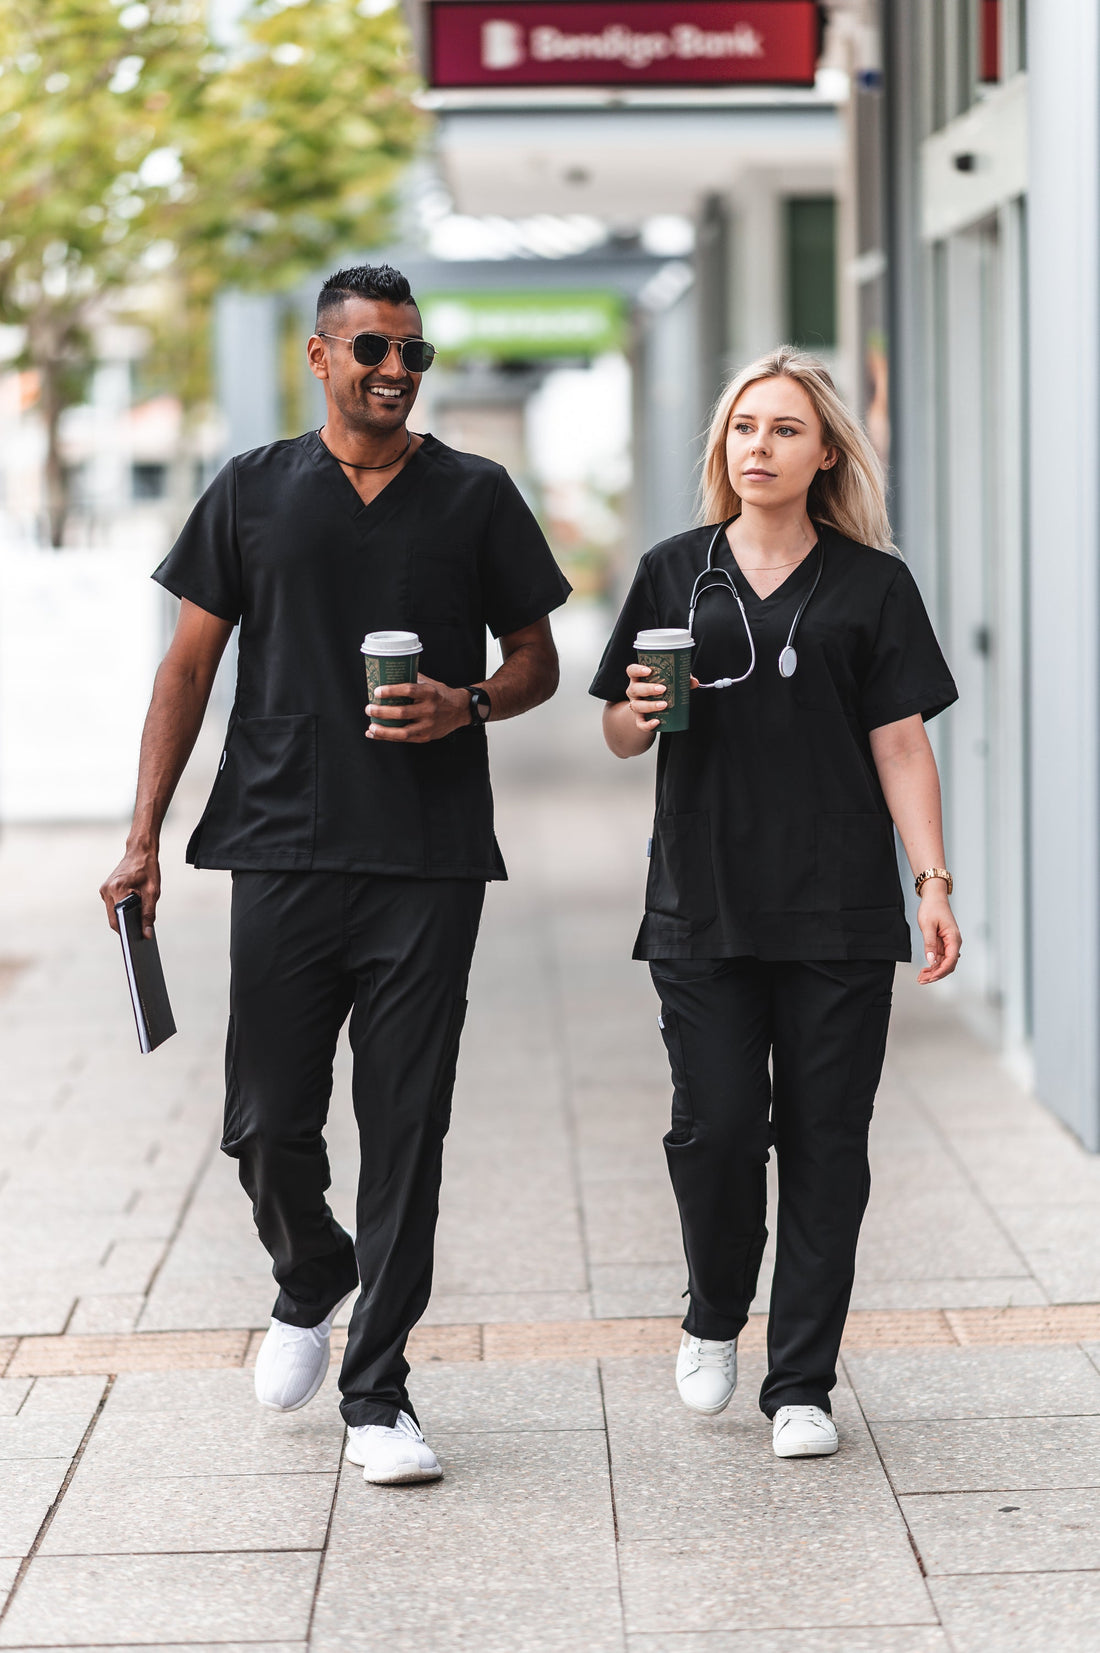 Which are Best Selling Scrubs in Australia?